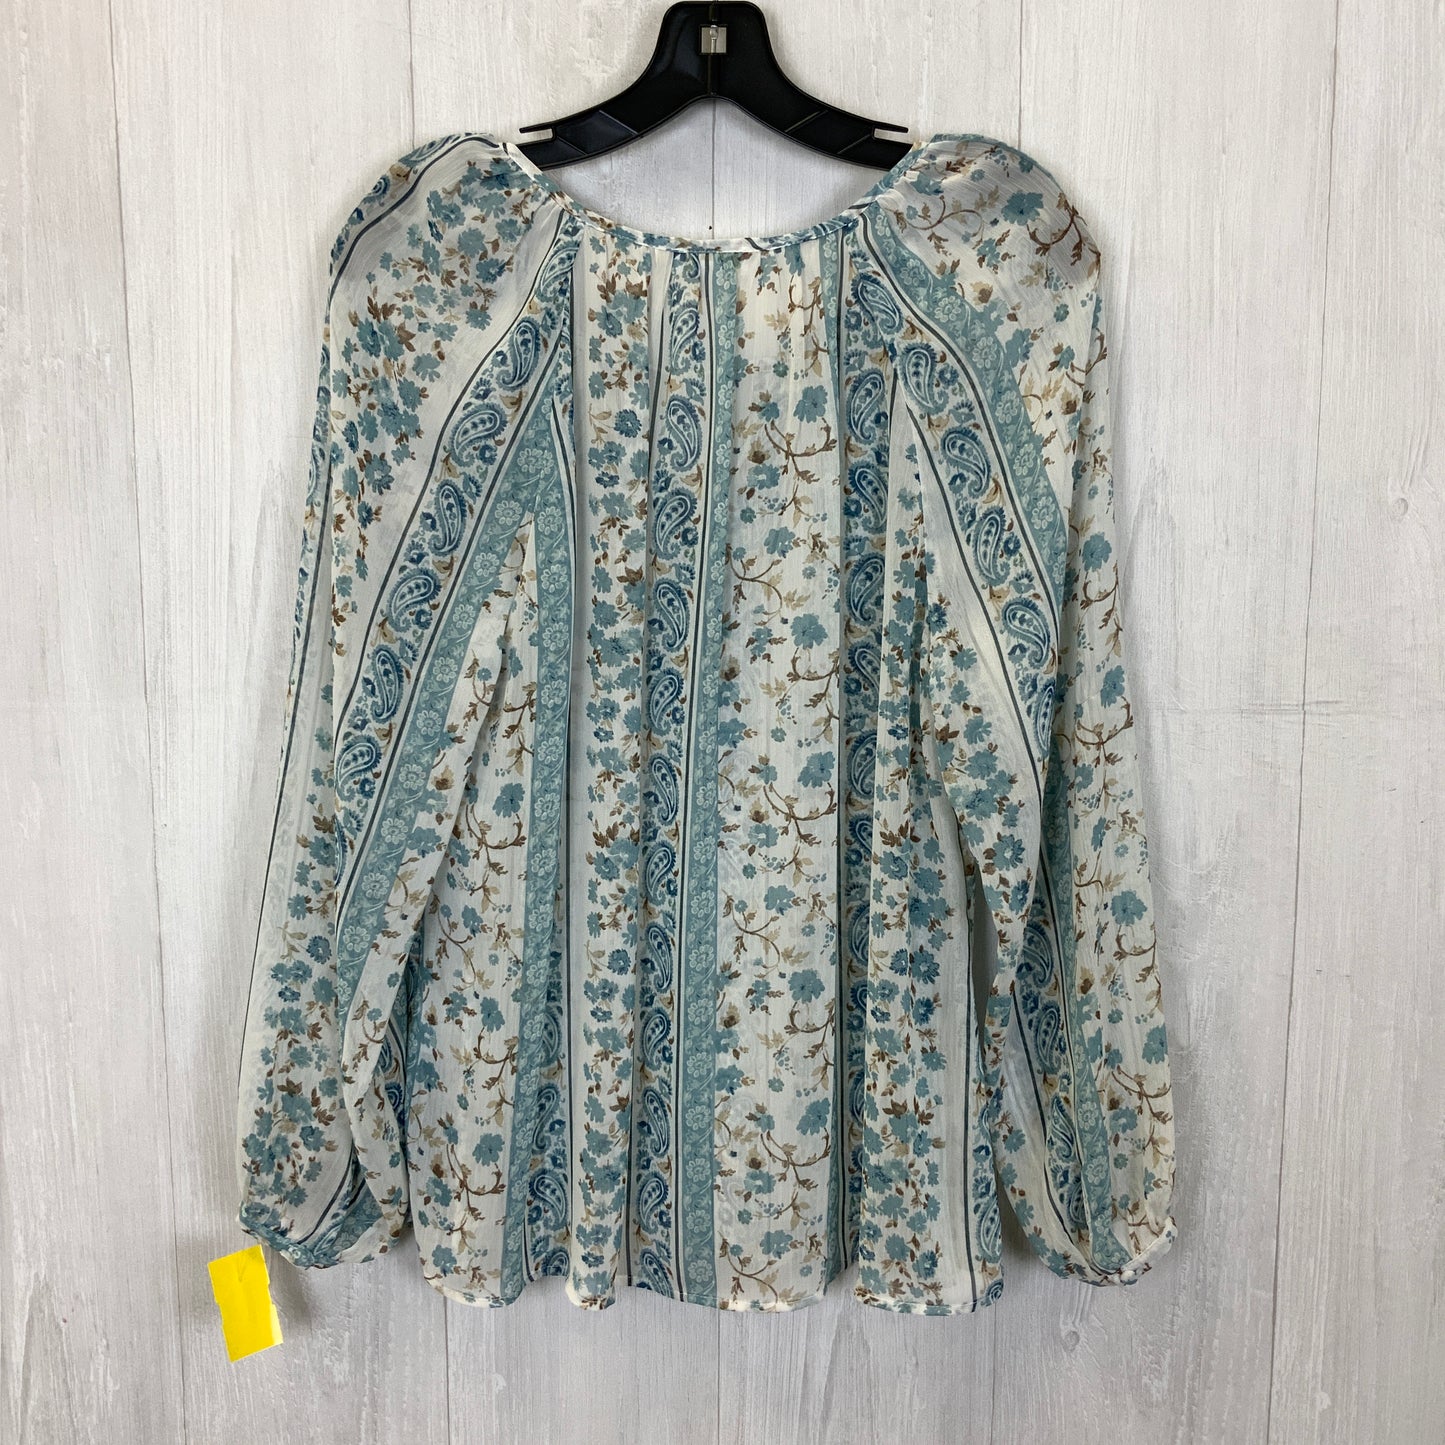 Top 3/4 Sleeve By Charming Charlie  Size: M